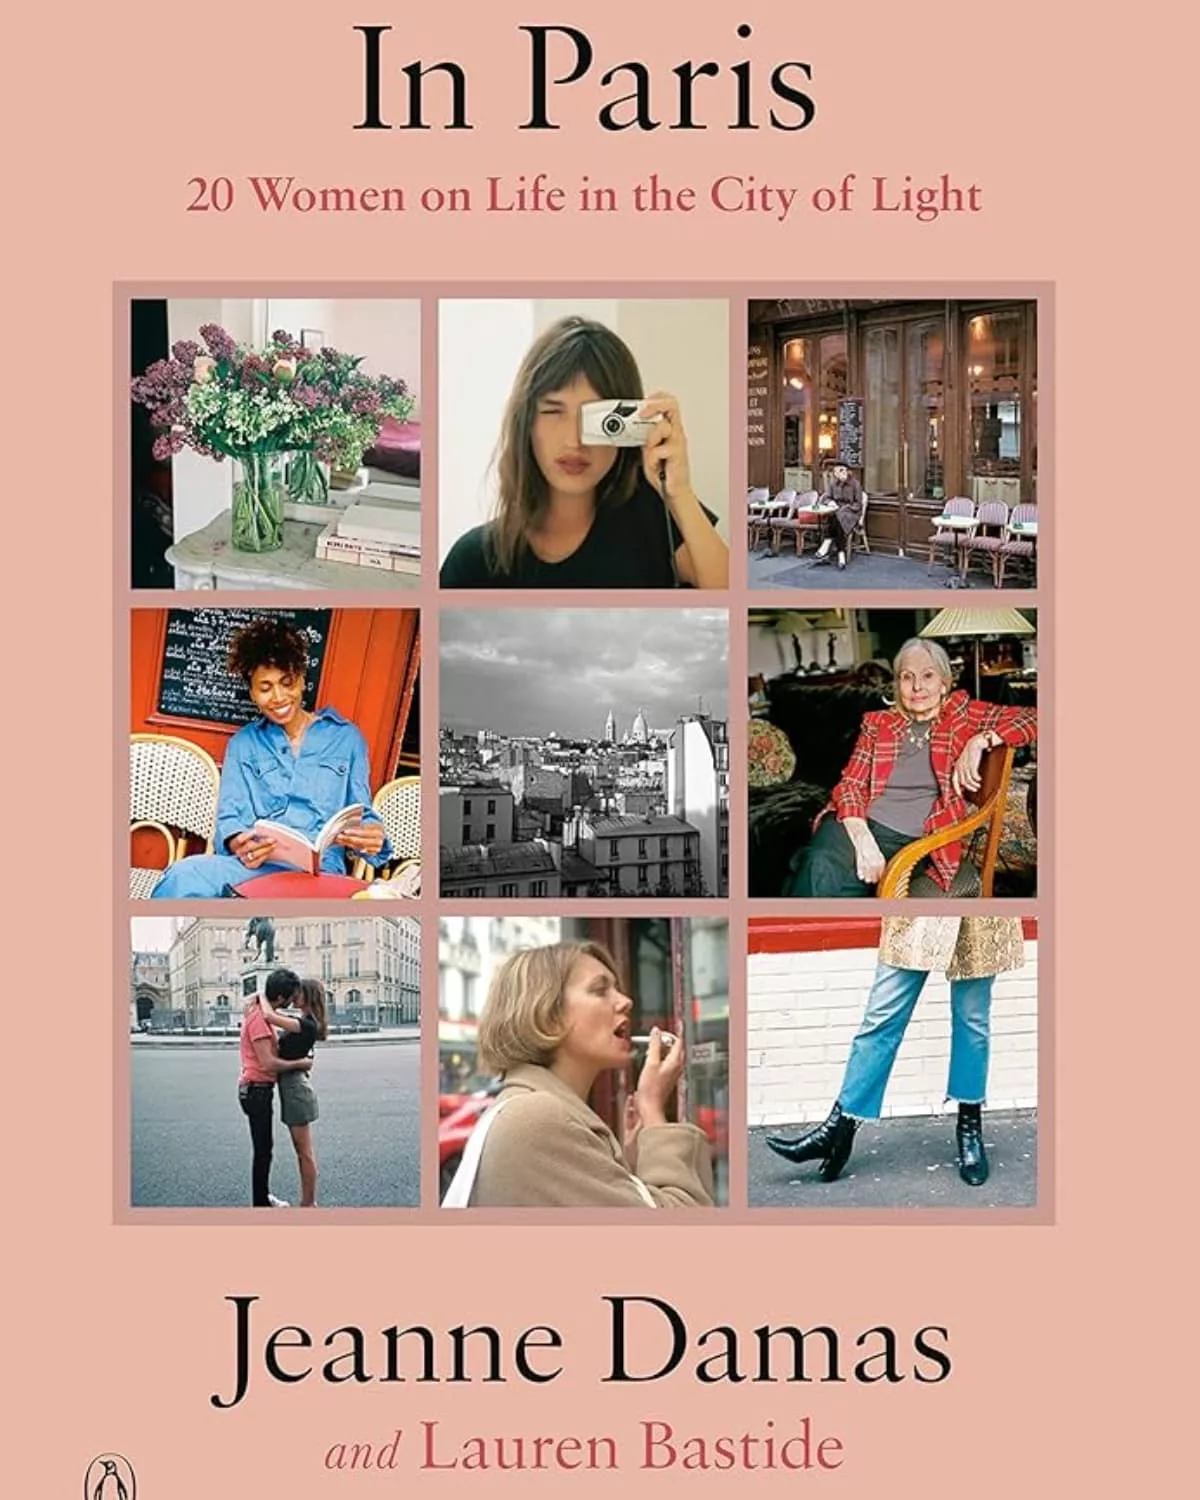 In Paris- 20 Women on Life in the City of Light book cover with photos of Parisian women